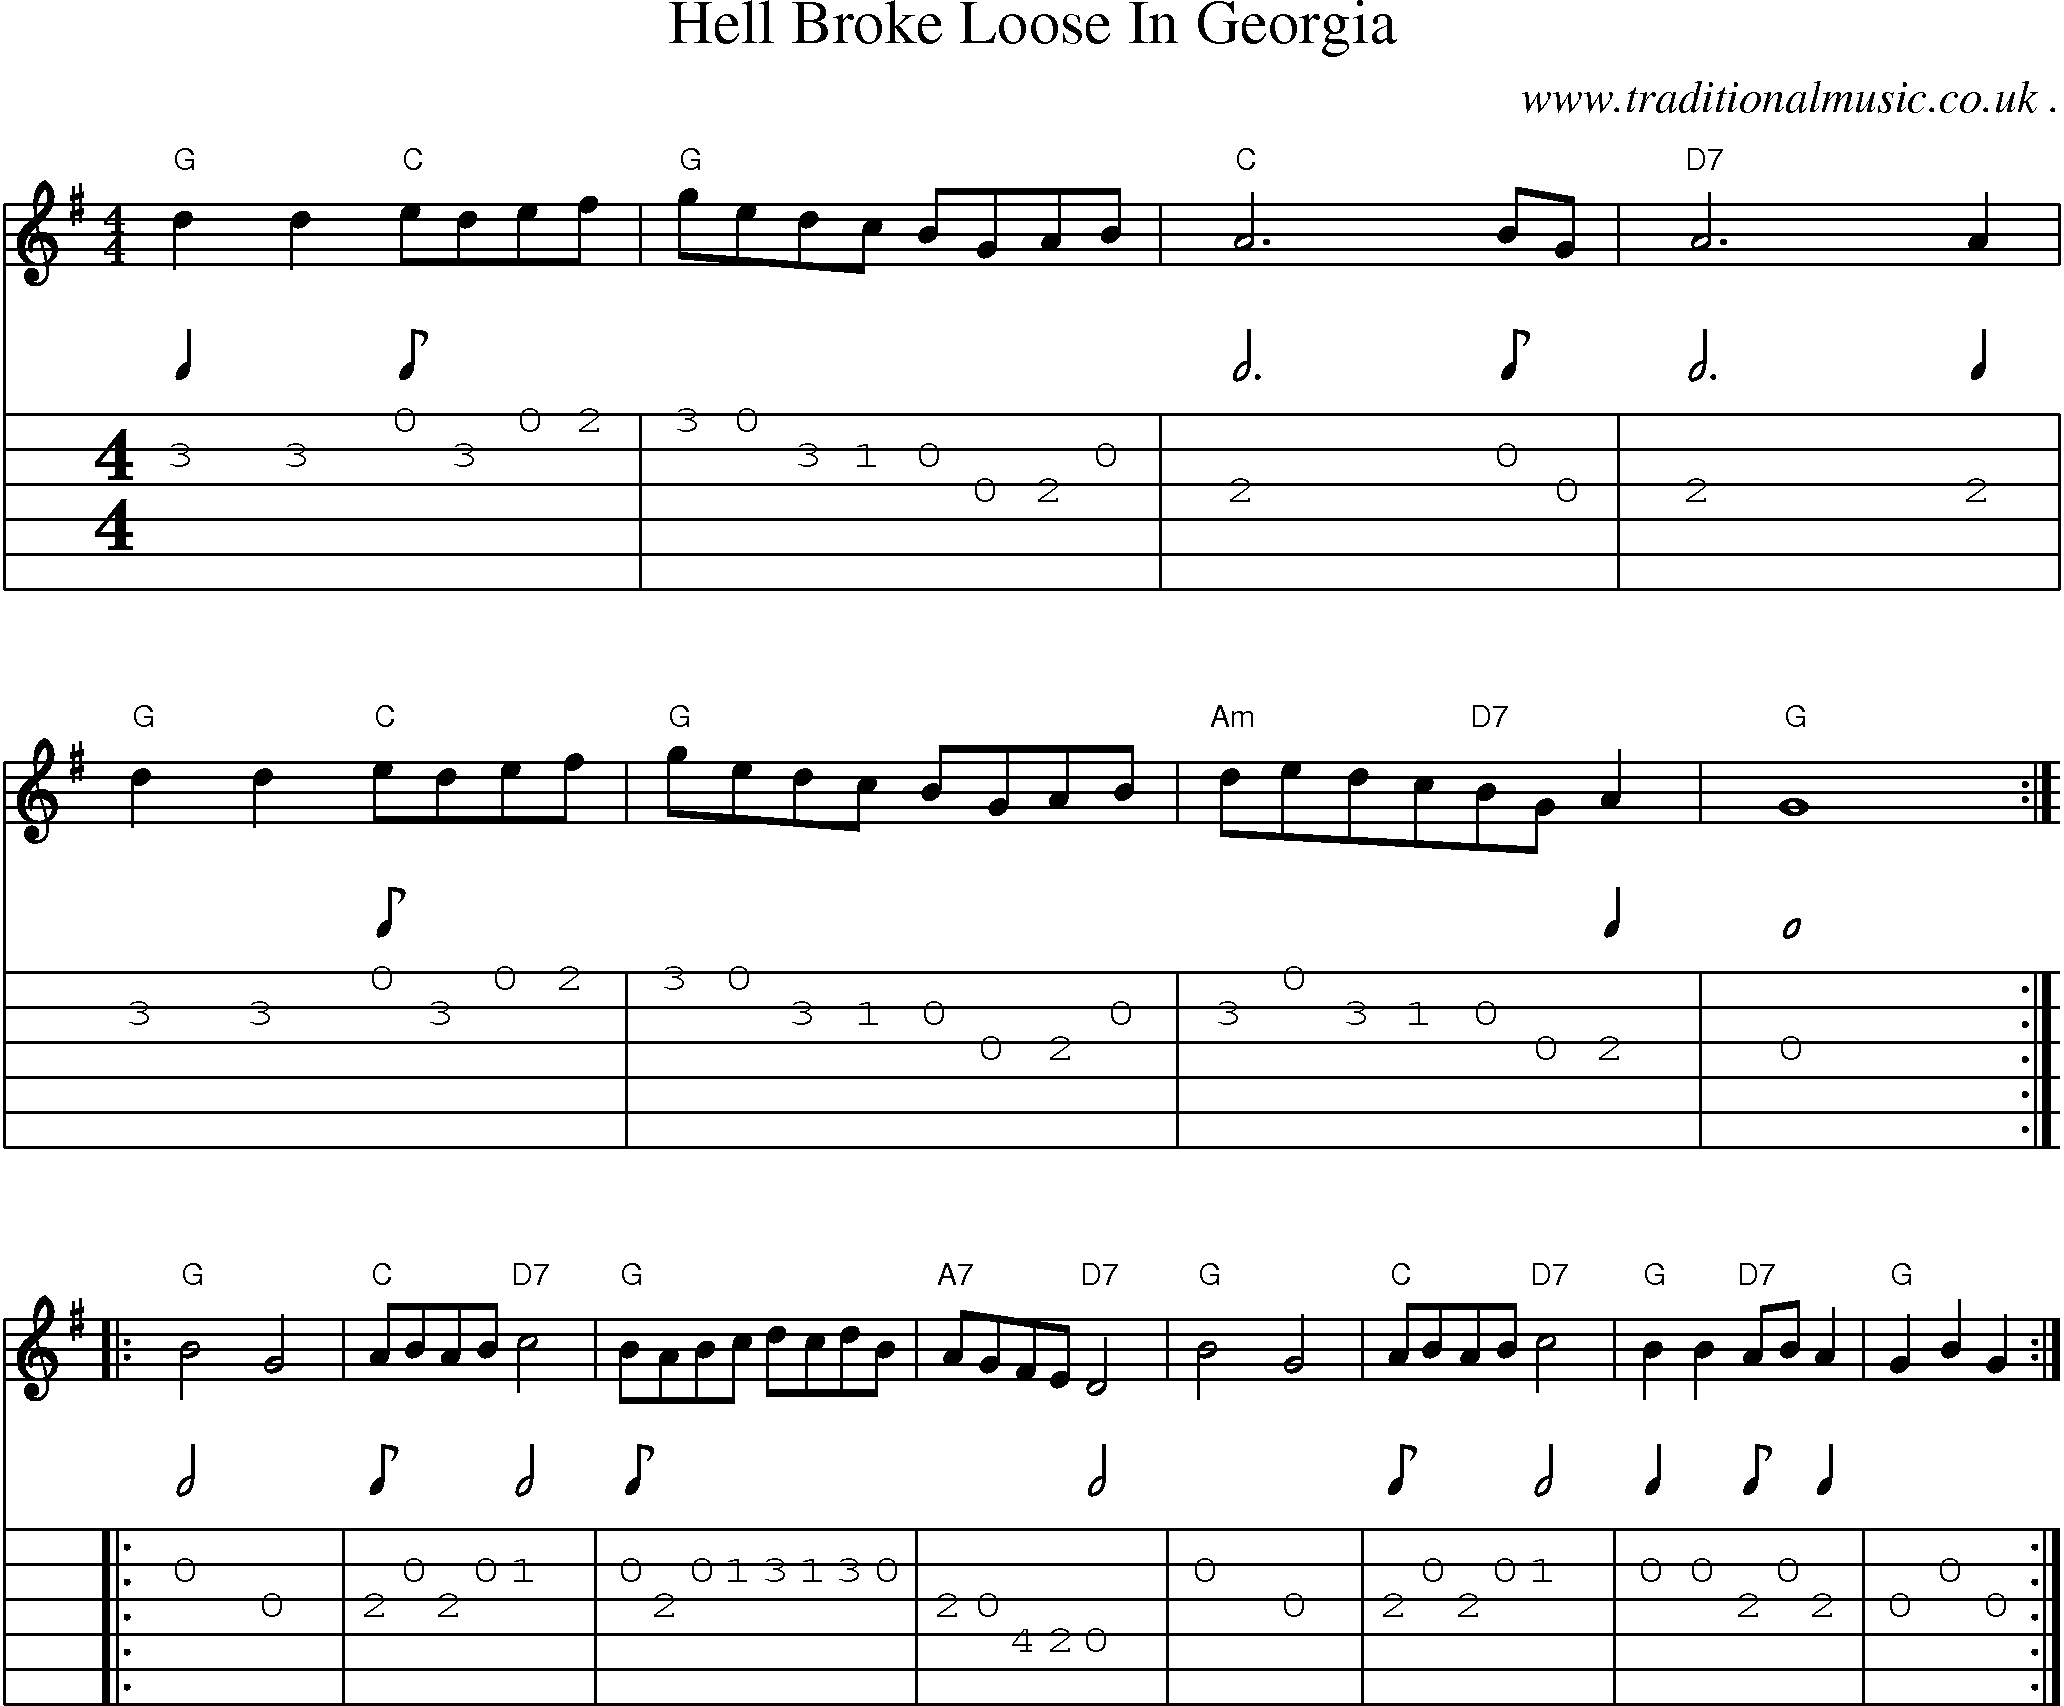 Sheet-Music and Guitar Tabs for Hell Broke Loose In Georgia